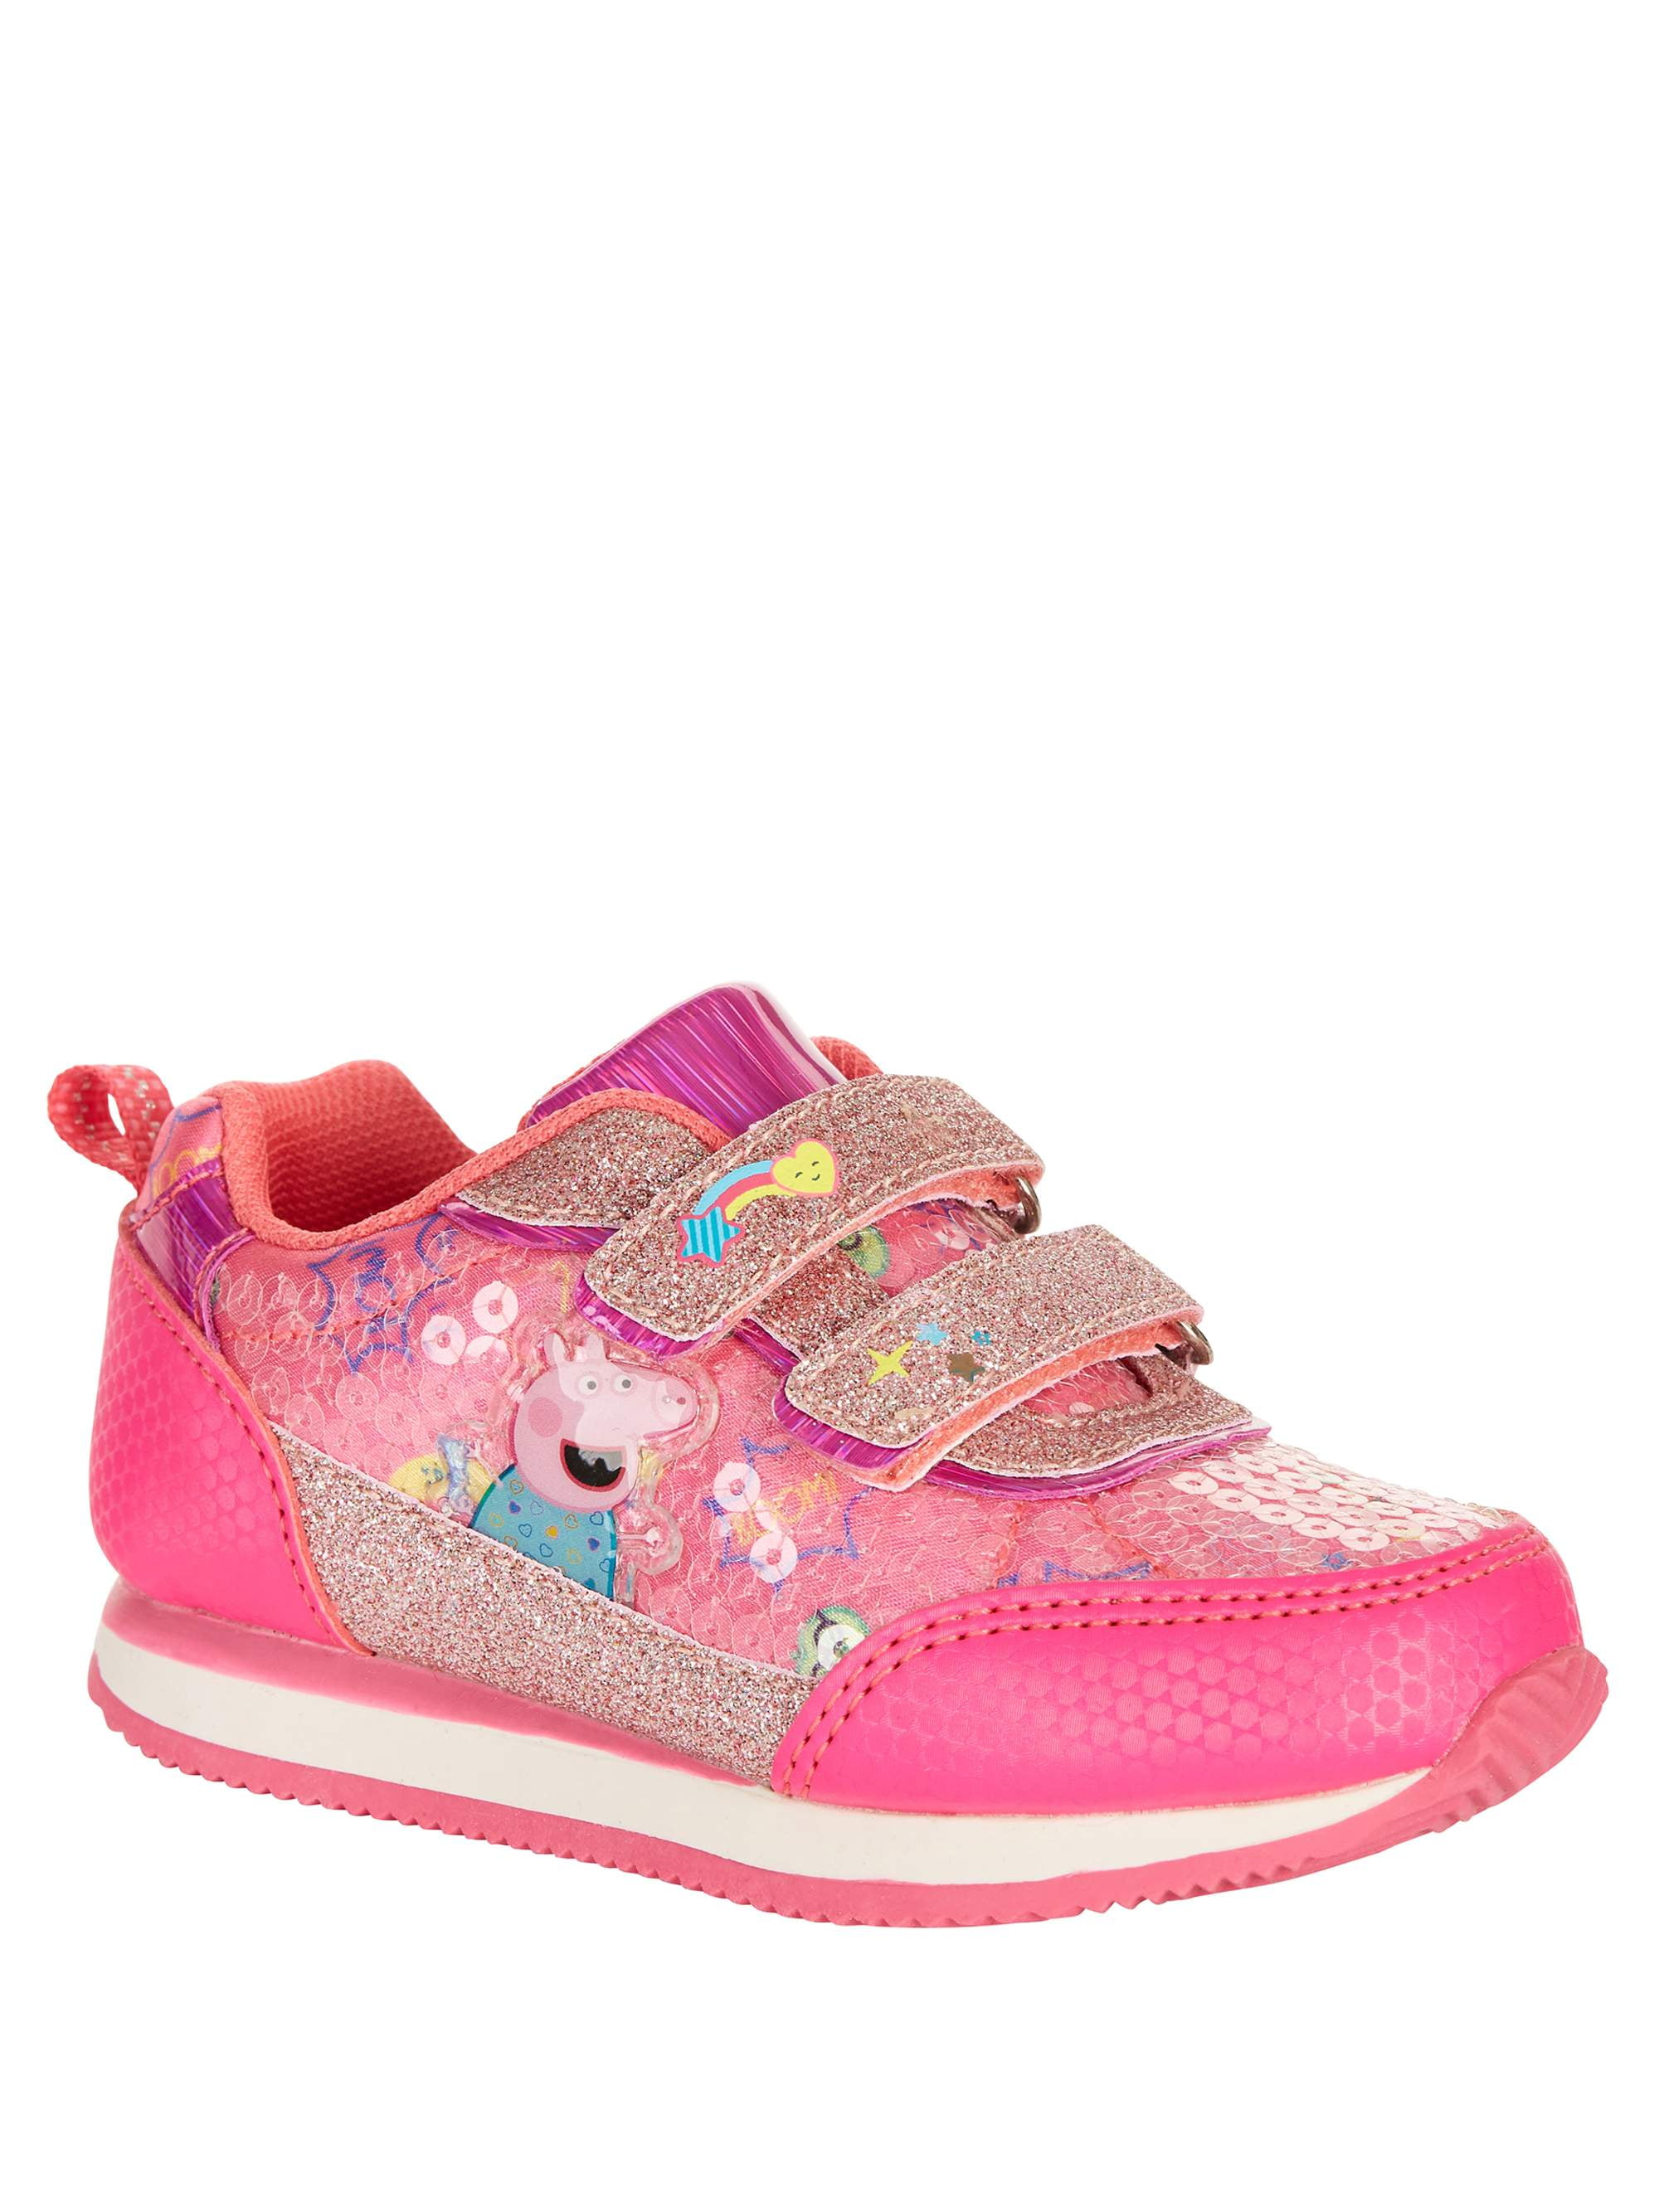 Girls Peppa Pig Trainers Kids Character Lightweight Sports Shoes Nursery Size 